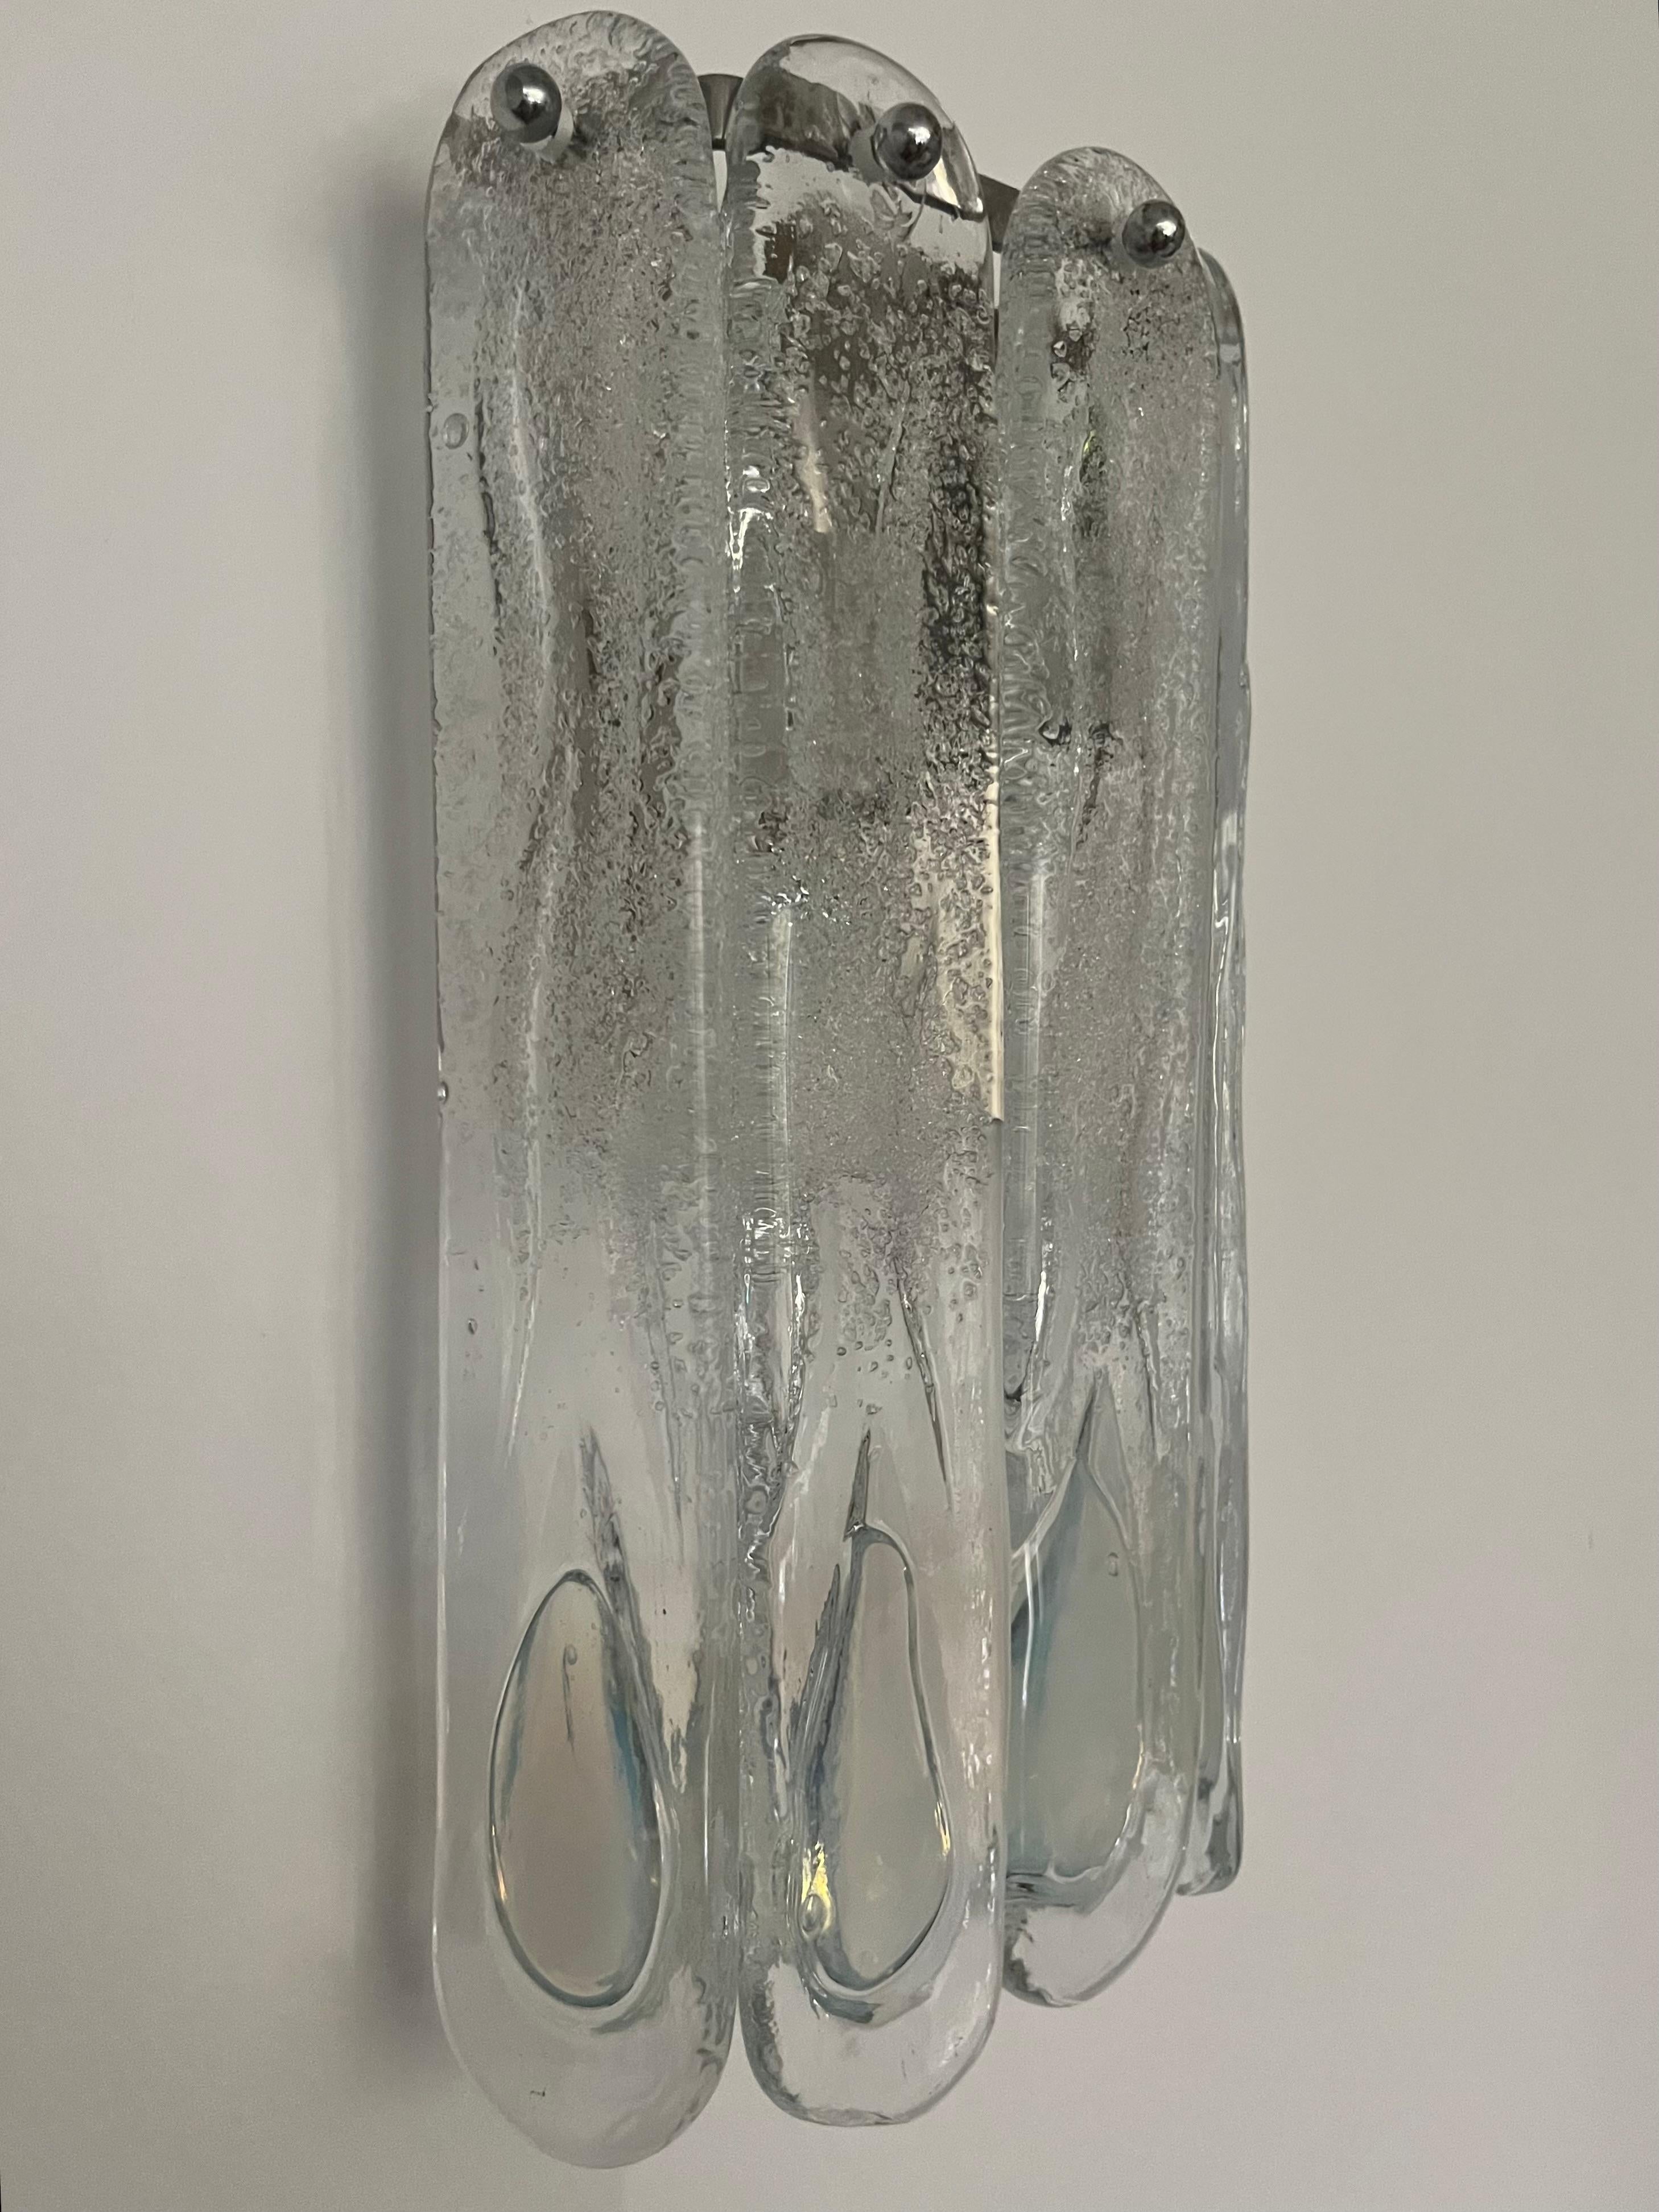 Stunning and beauty Pair of Italian Iridescent Murano glass Wall Sconces. These fixtures were designed and manufactured during the 1970s in Italy by Mazzega.
Each Sconce is equipped with two light sockets E14. A professional electrician has checked